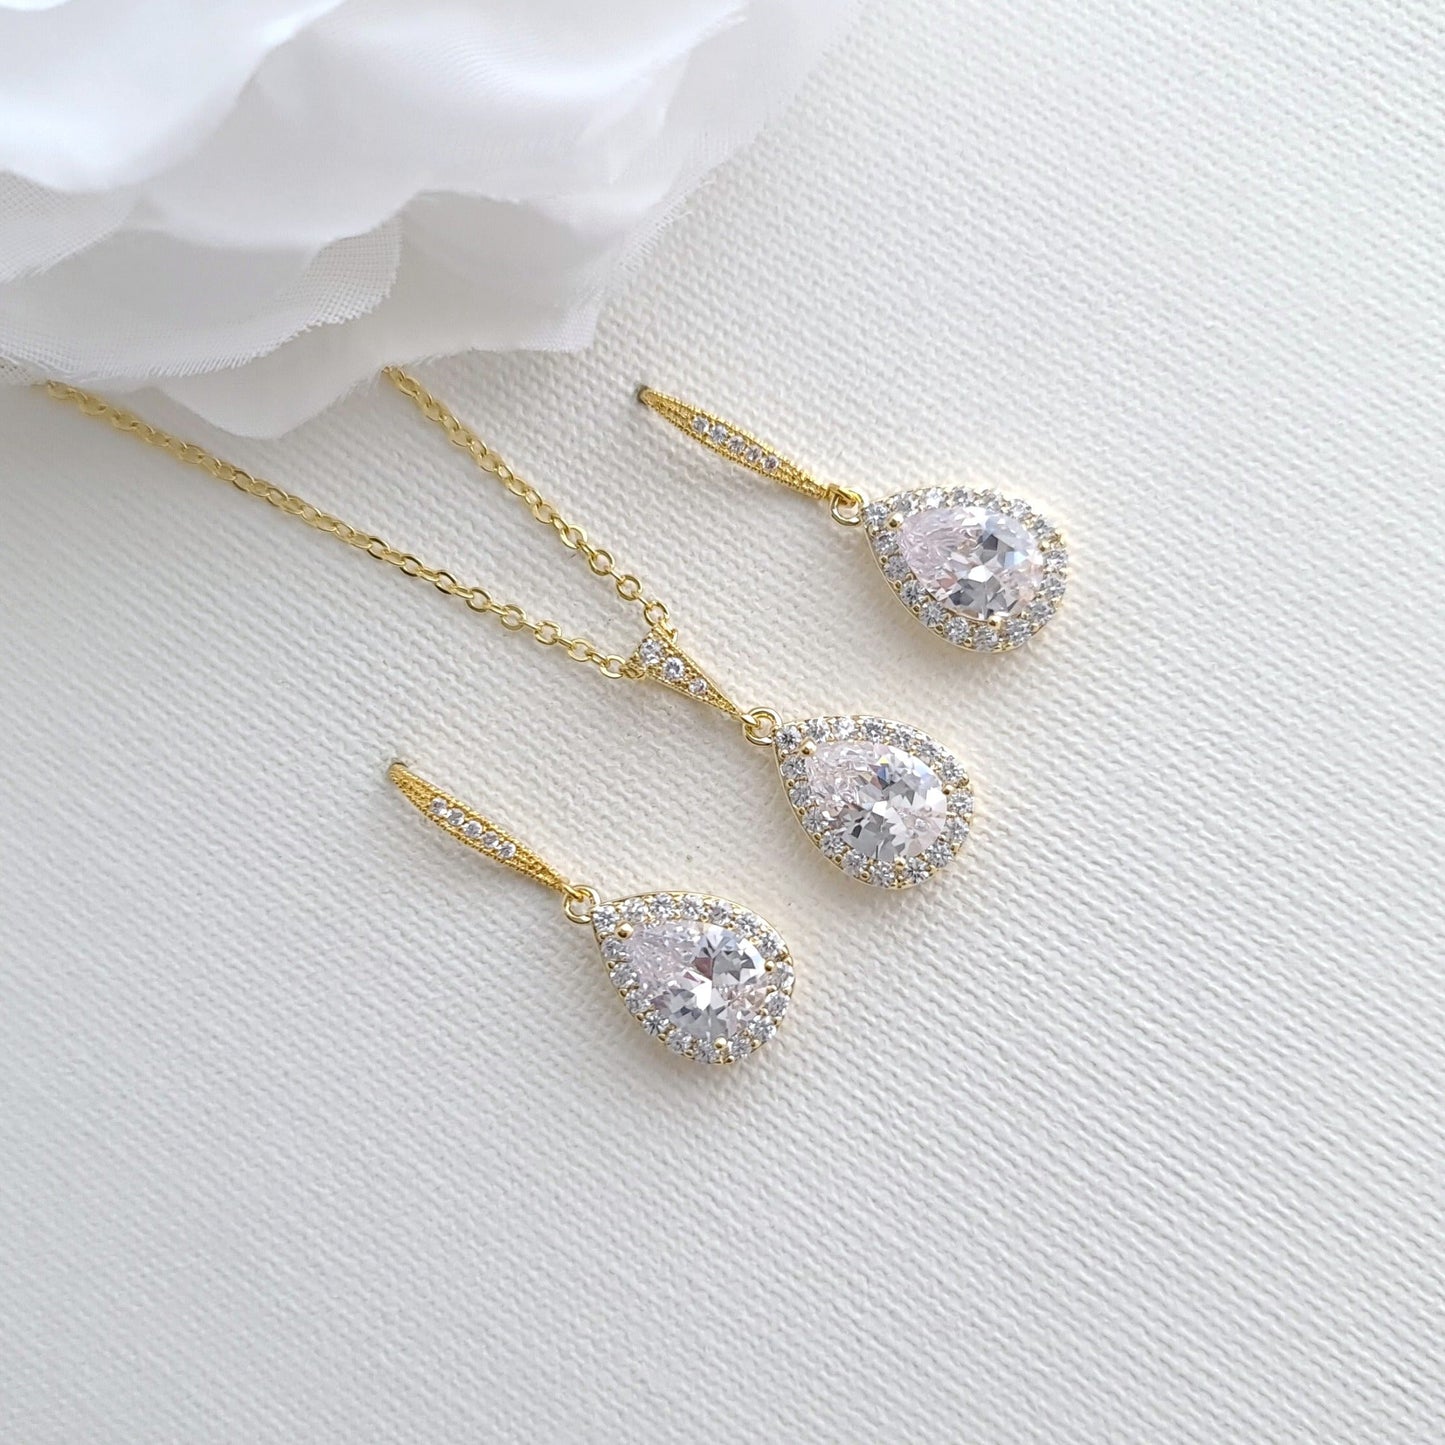 Rose Gold Dangle Earrings and Necklace Set-Emma